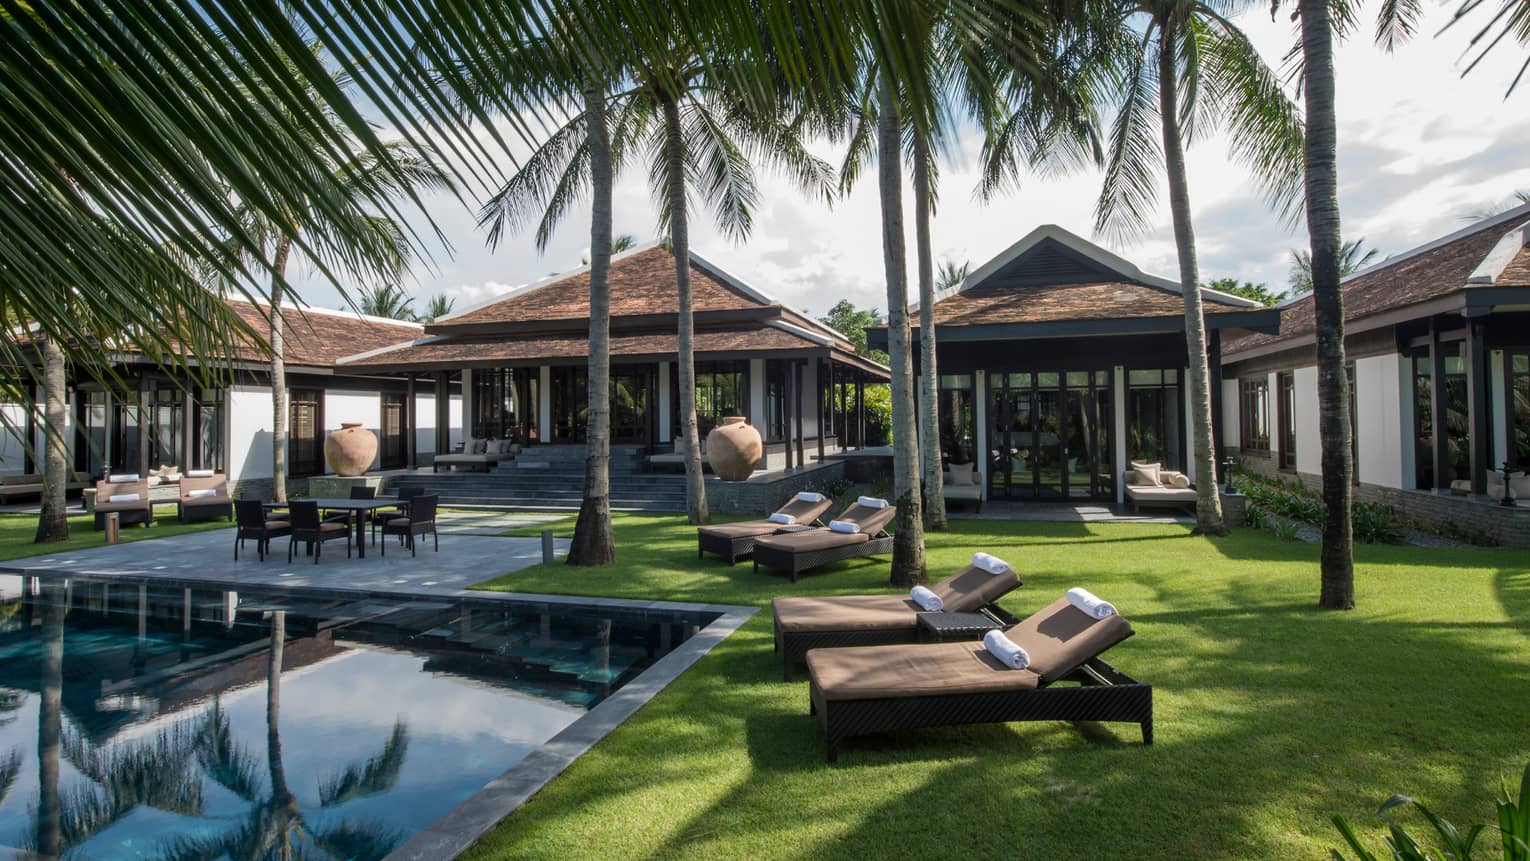 Three-bedroom Hilltop Villas, palm trees, lounge chairs on lawn around outdoor pool